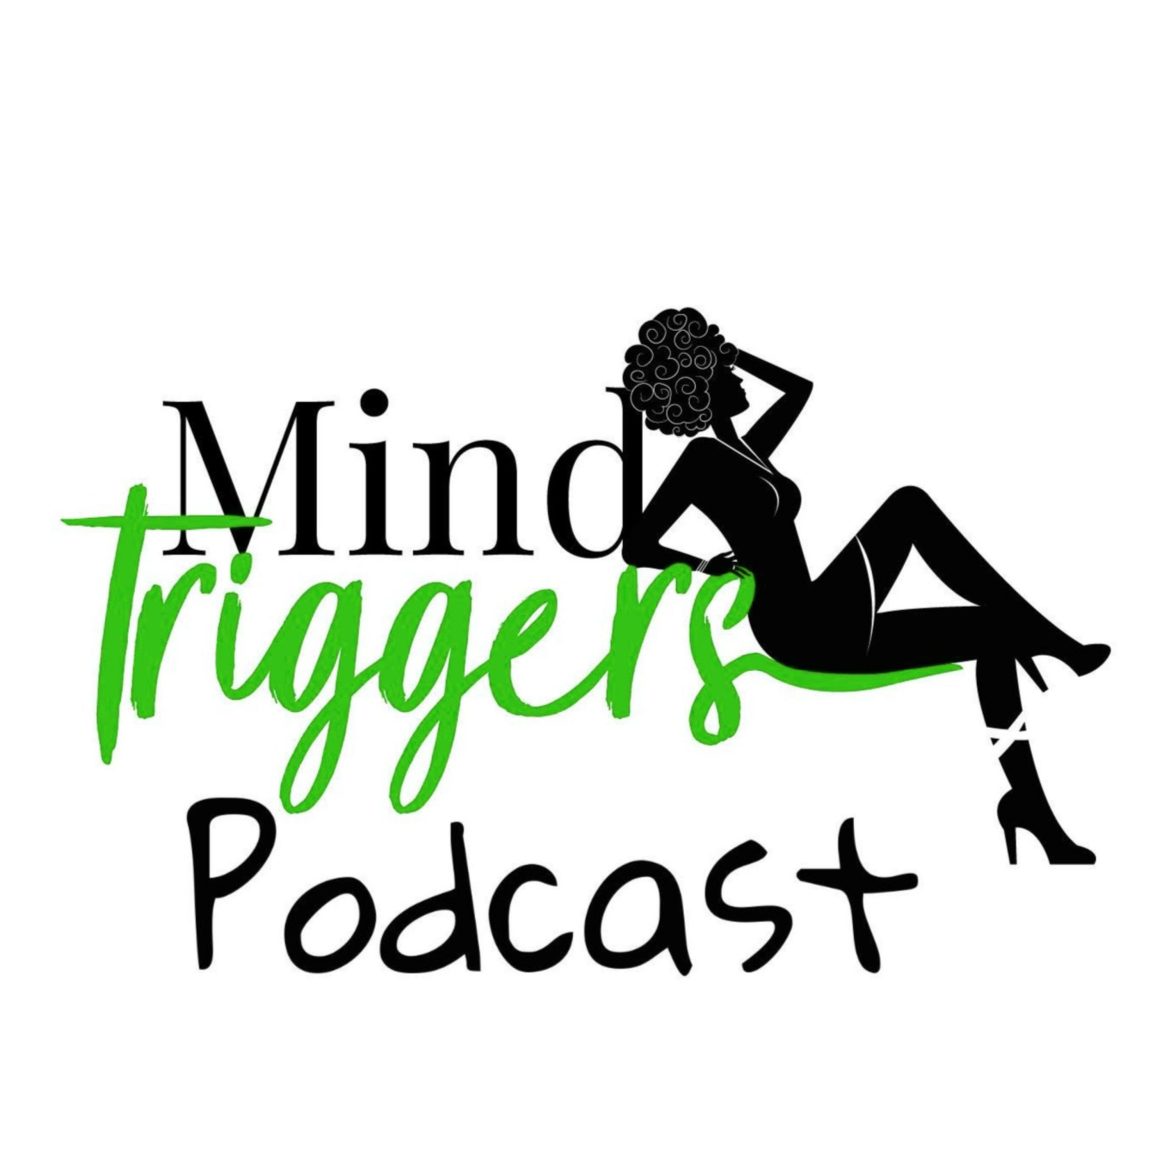 Black Podcasting - S4: Ep. 6.5 Mind Triggers Presents A Lady Name Siren part 2